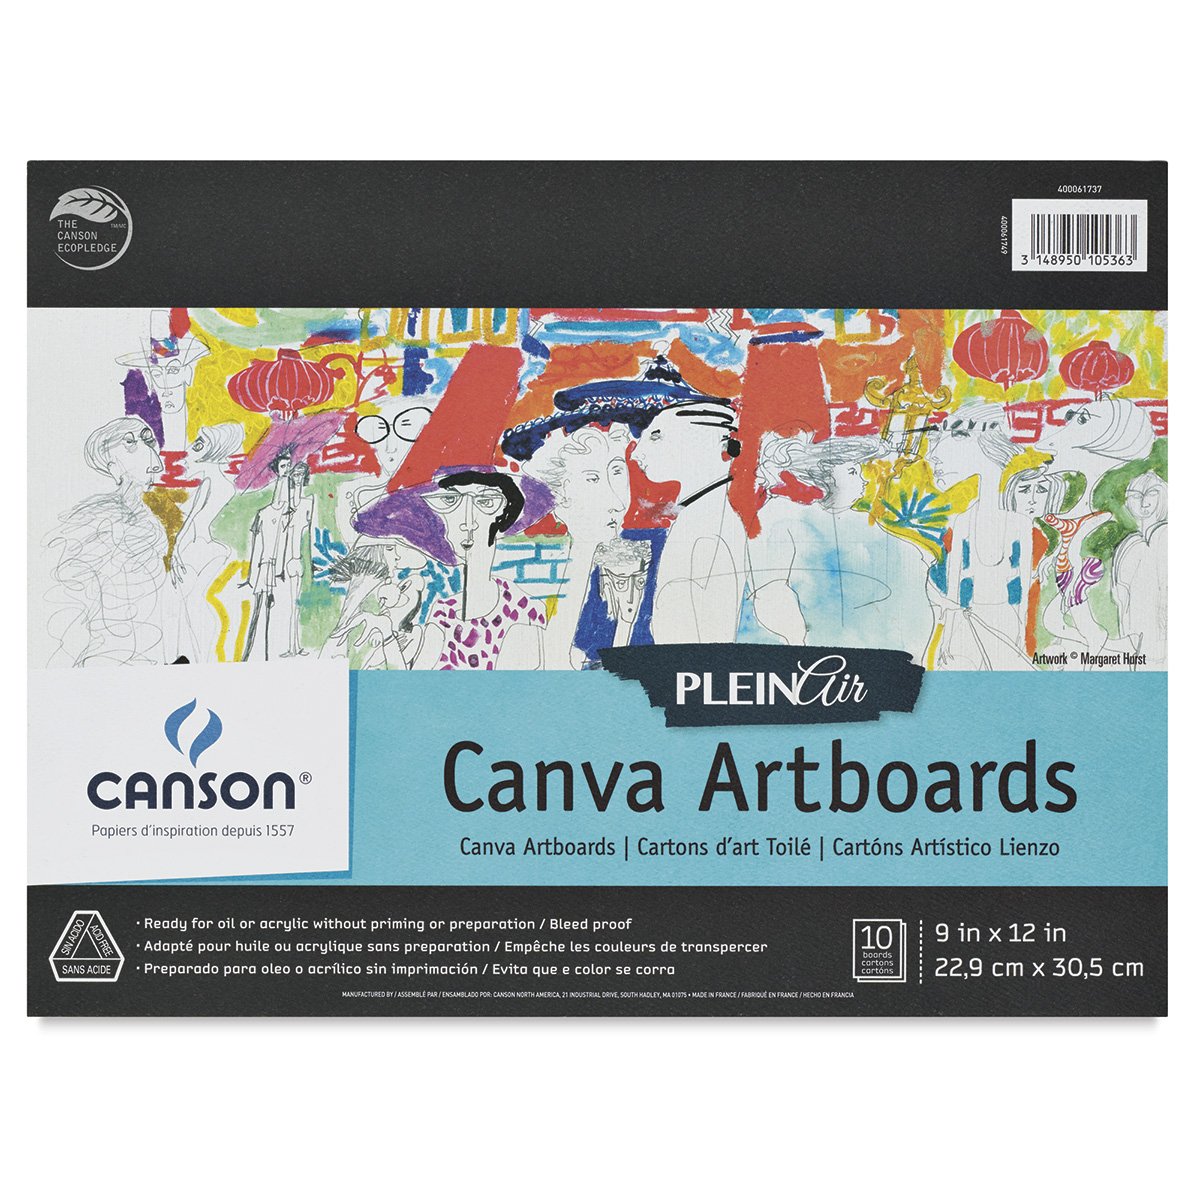 Best Illustration Boards for Drawings and Mixed-Media Works